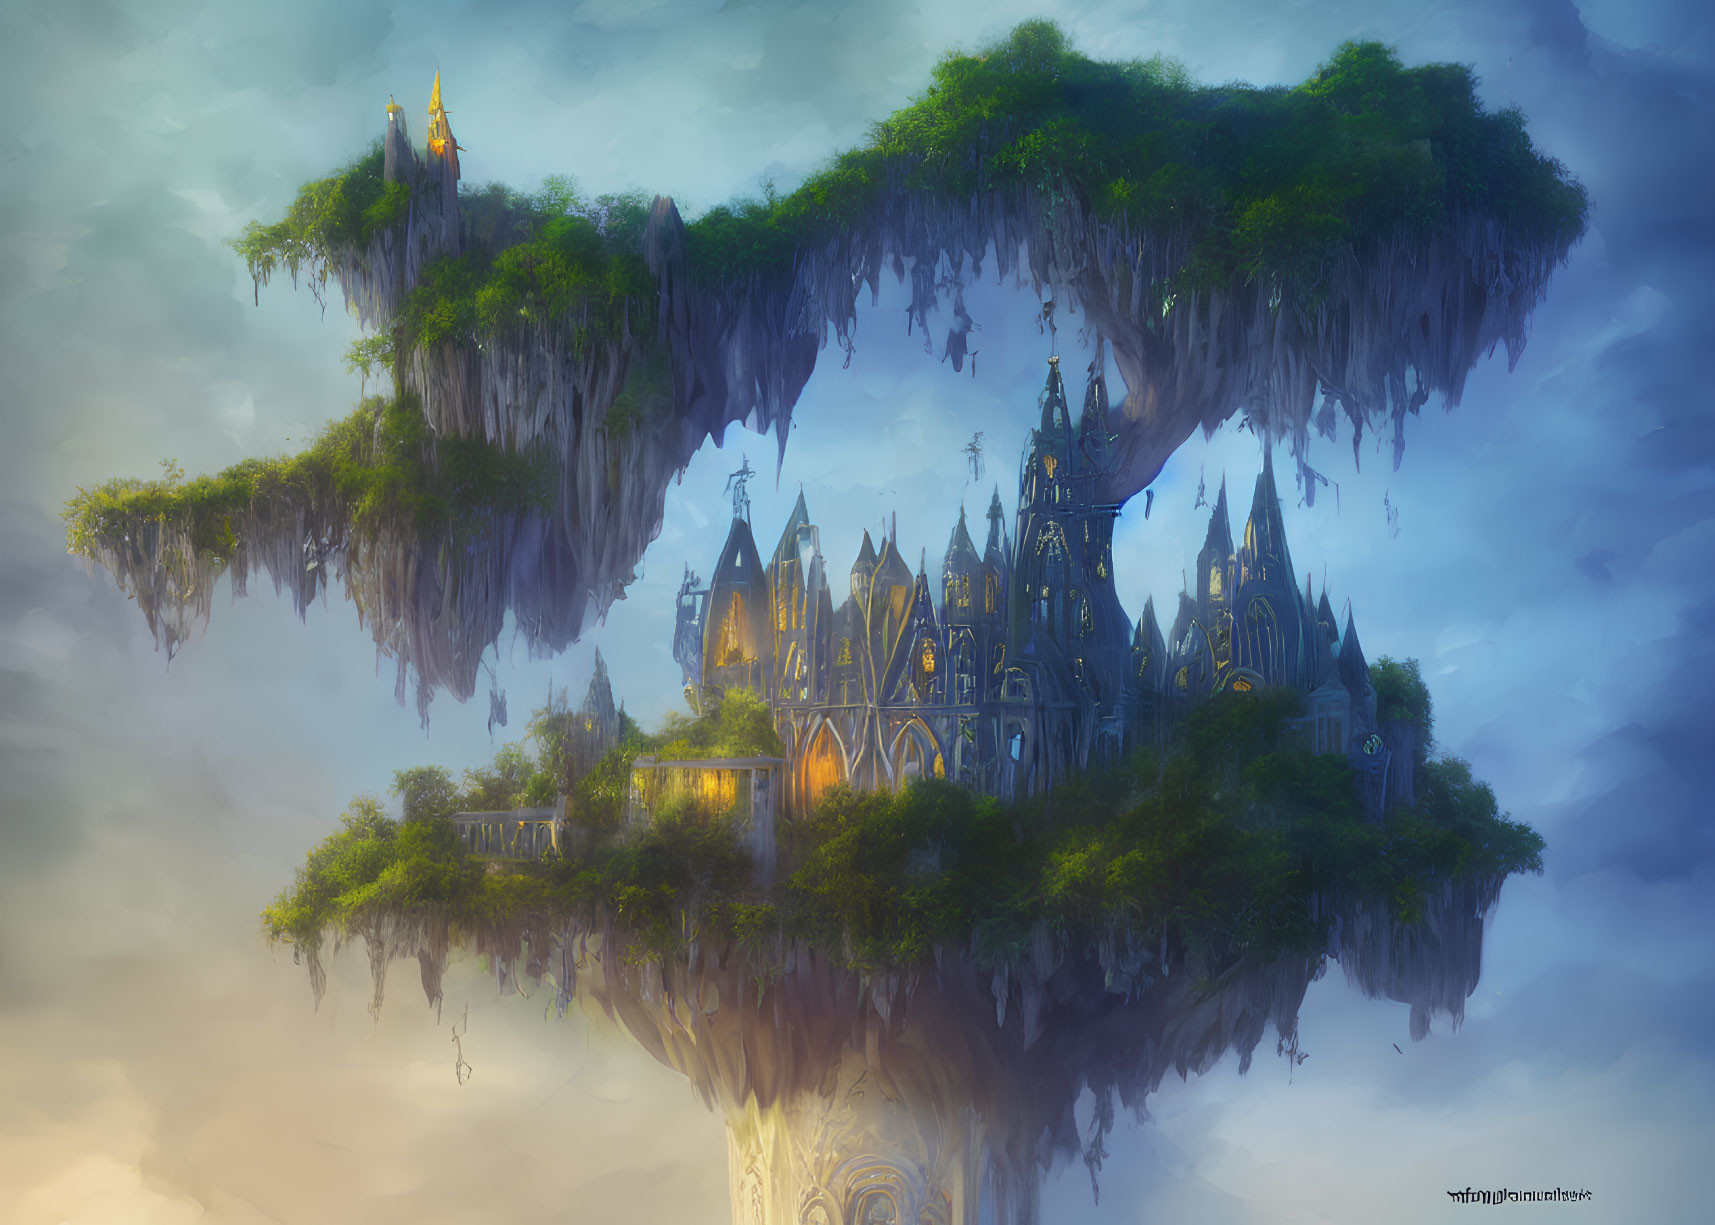 Fantastical city on floating island with lush greenery & Gothic architecture